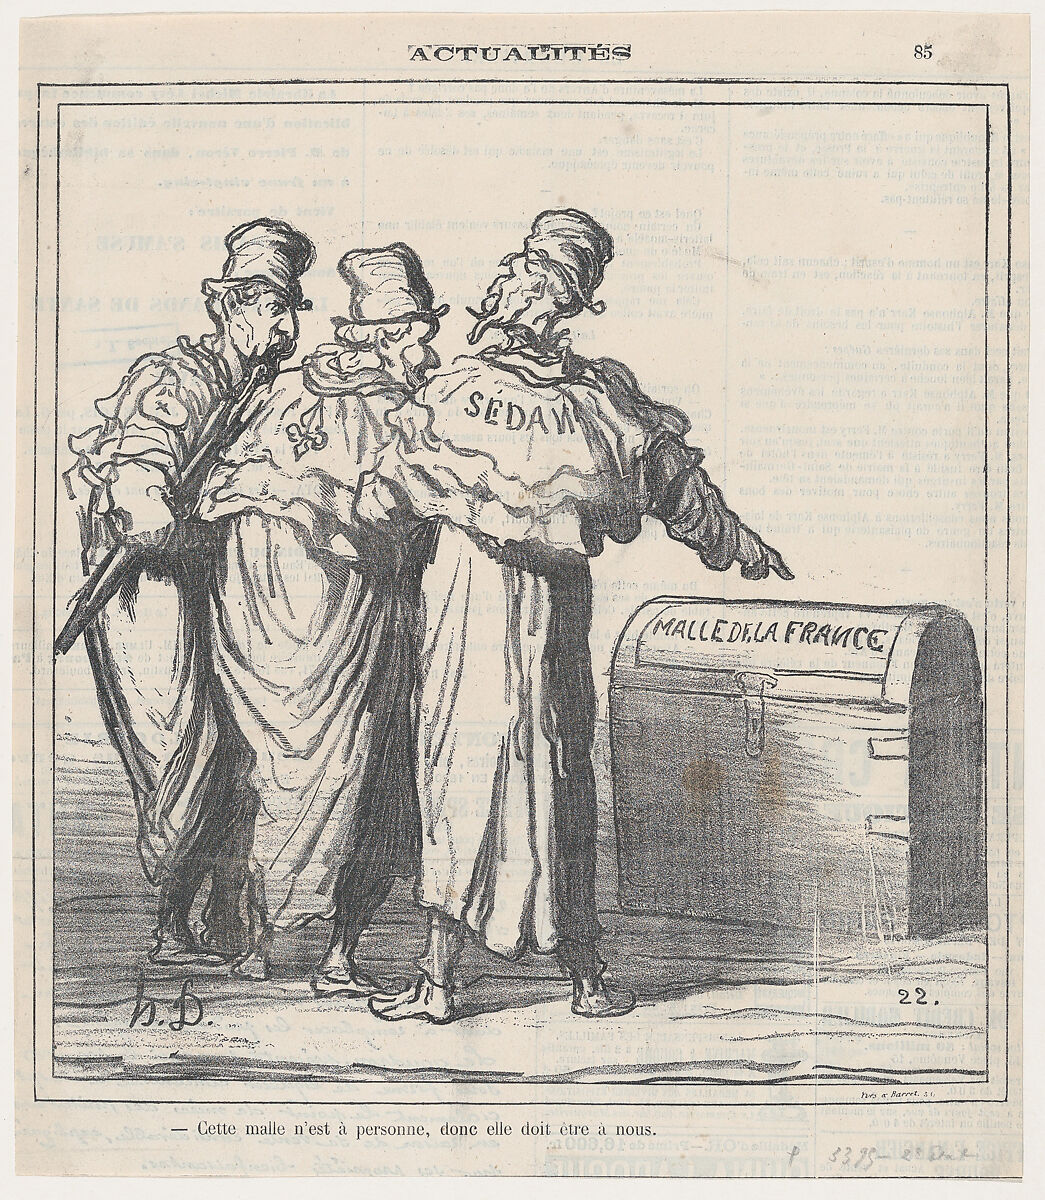 This trunk belongs no one, so it must be ours!, from 'News of the day,' published in "Le Charivari", Honoré Daumier (French, Marseilles 1808–1879 Valmondois), Lithograph on newsprint; second state of two (Delteil) 